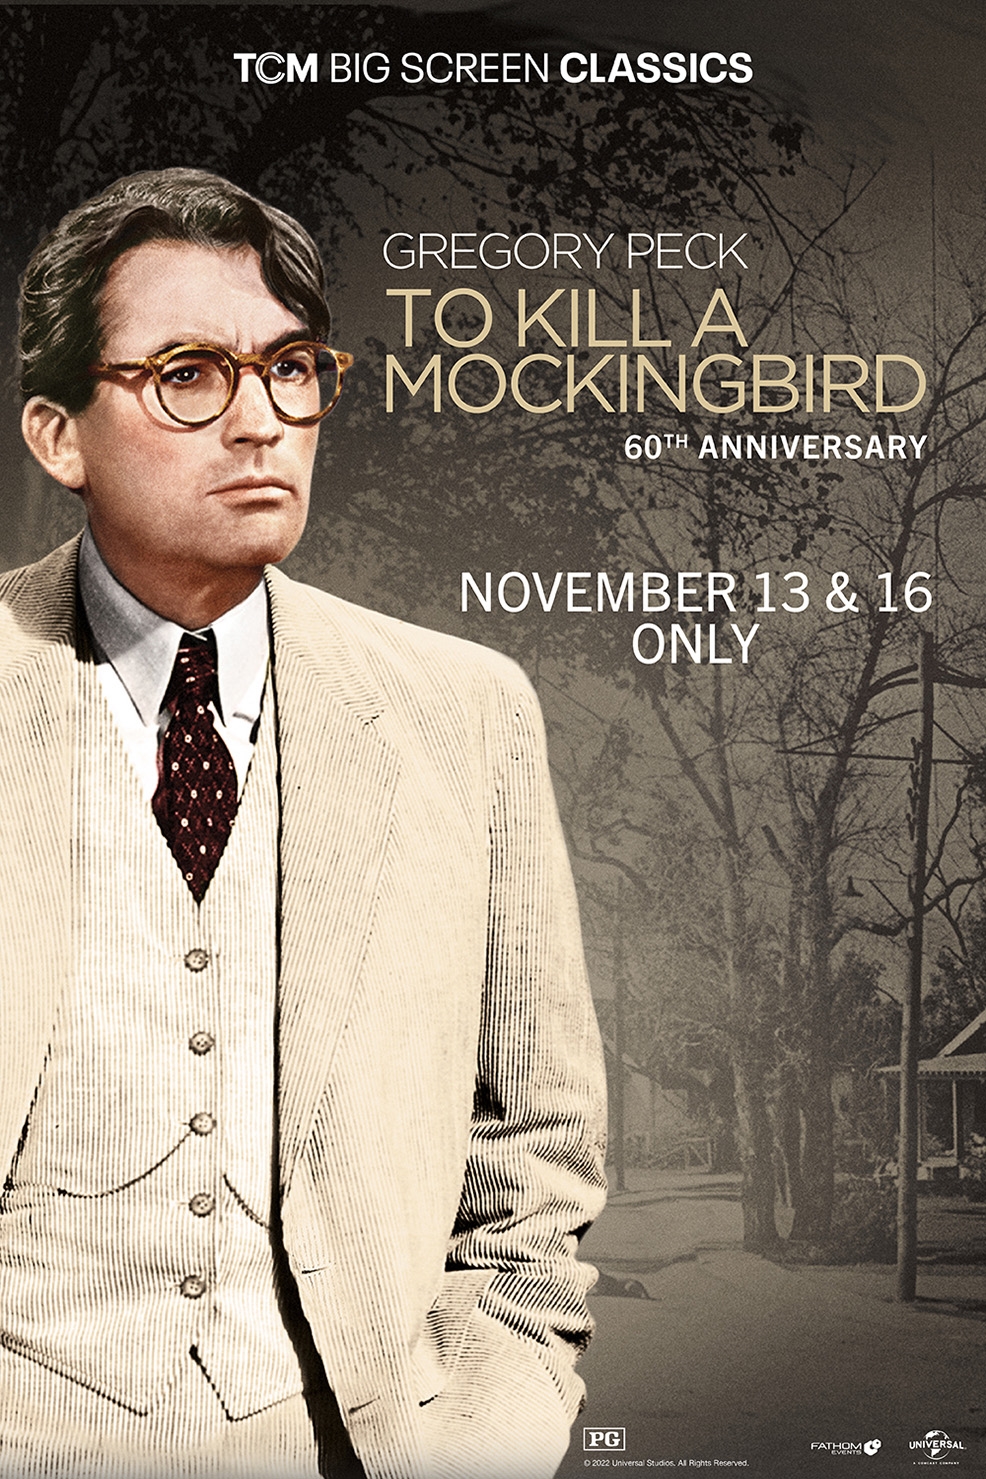 Poster of To Kill A Mockingbird 60th Anniversary presented by TCM